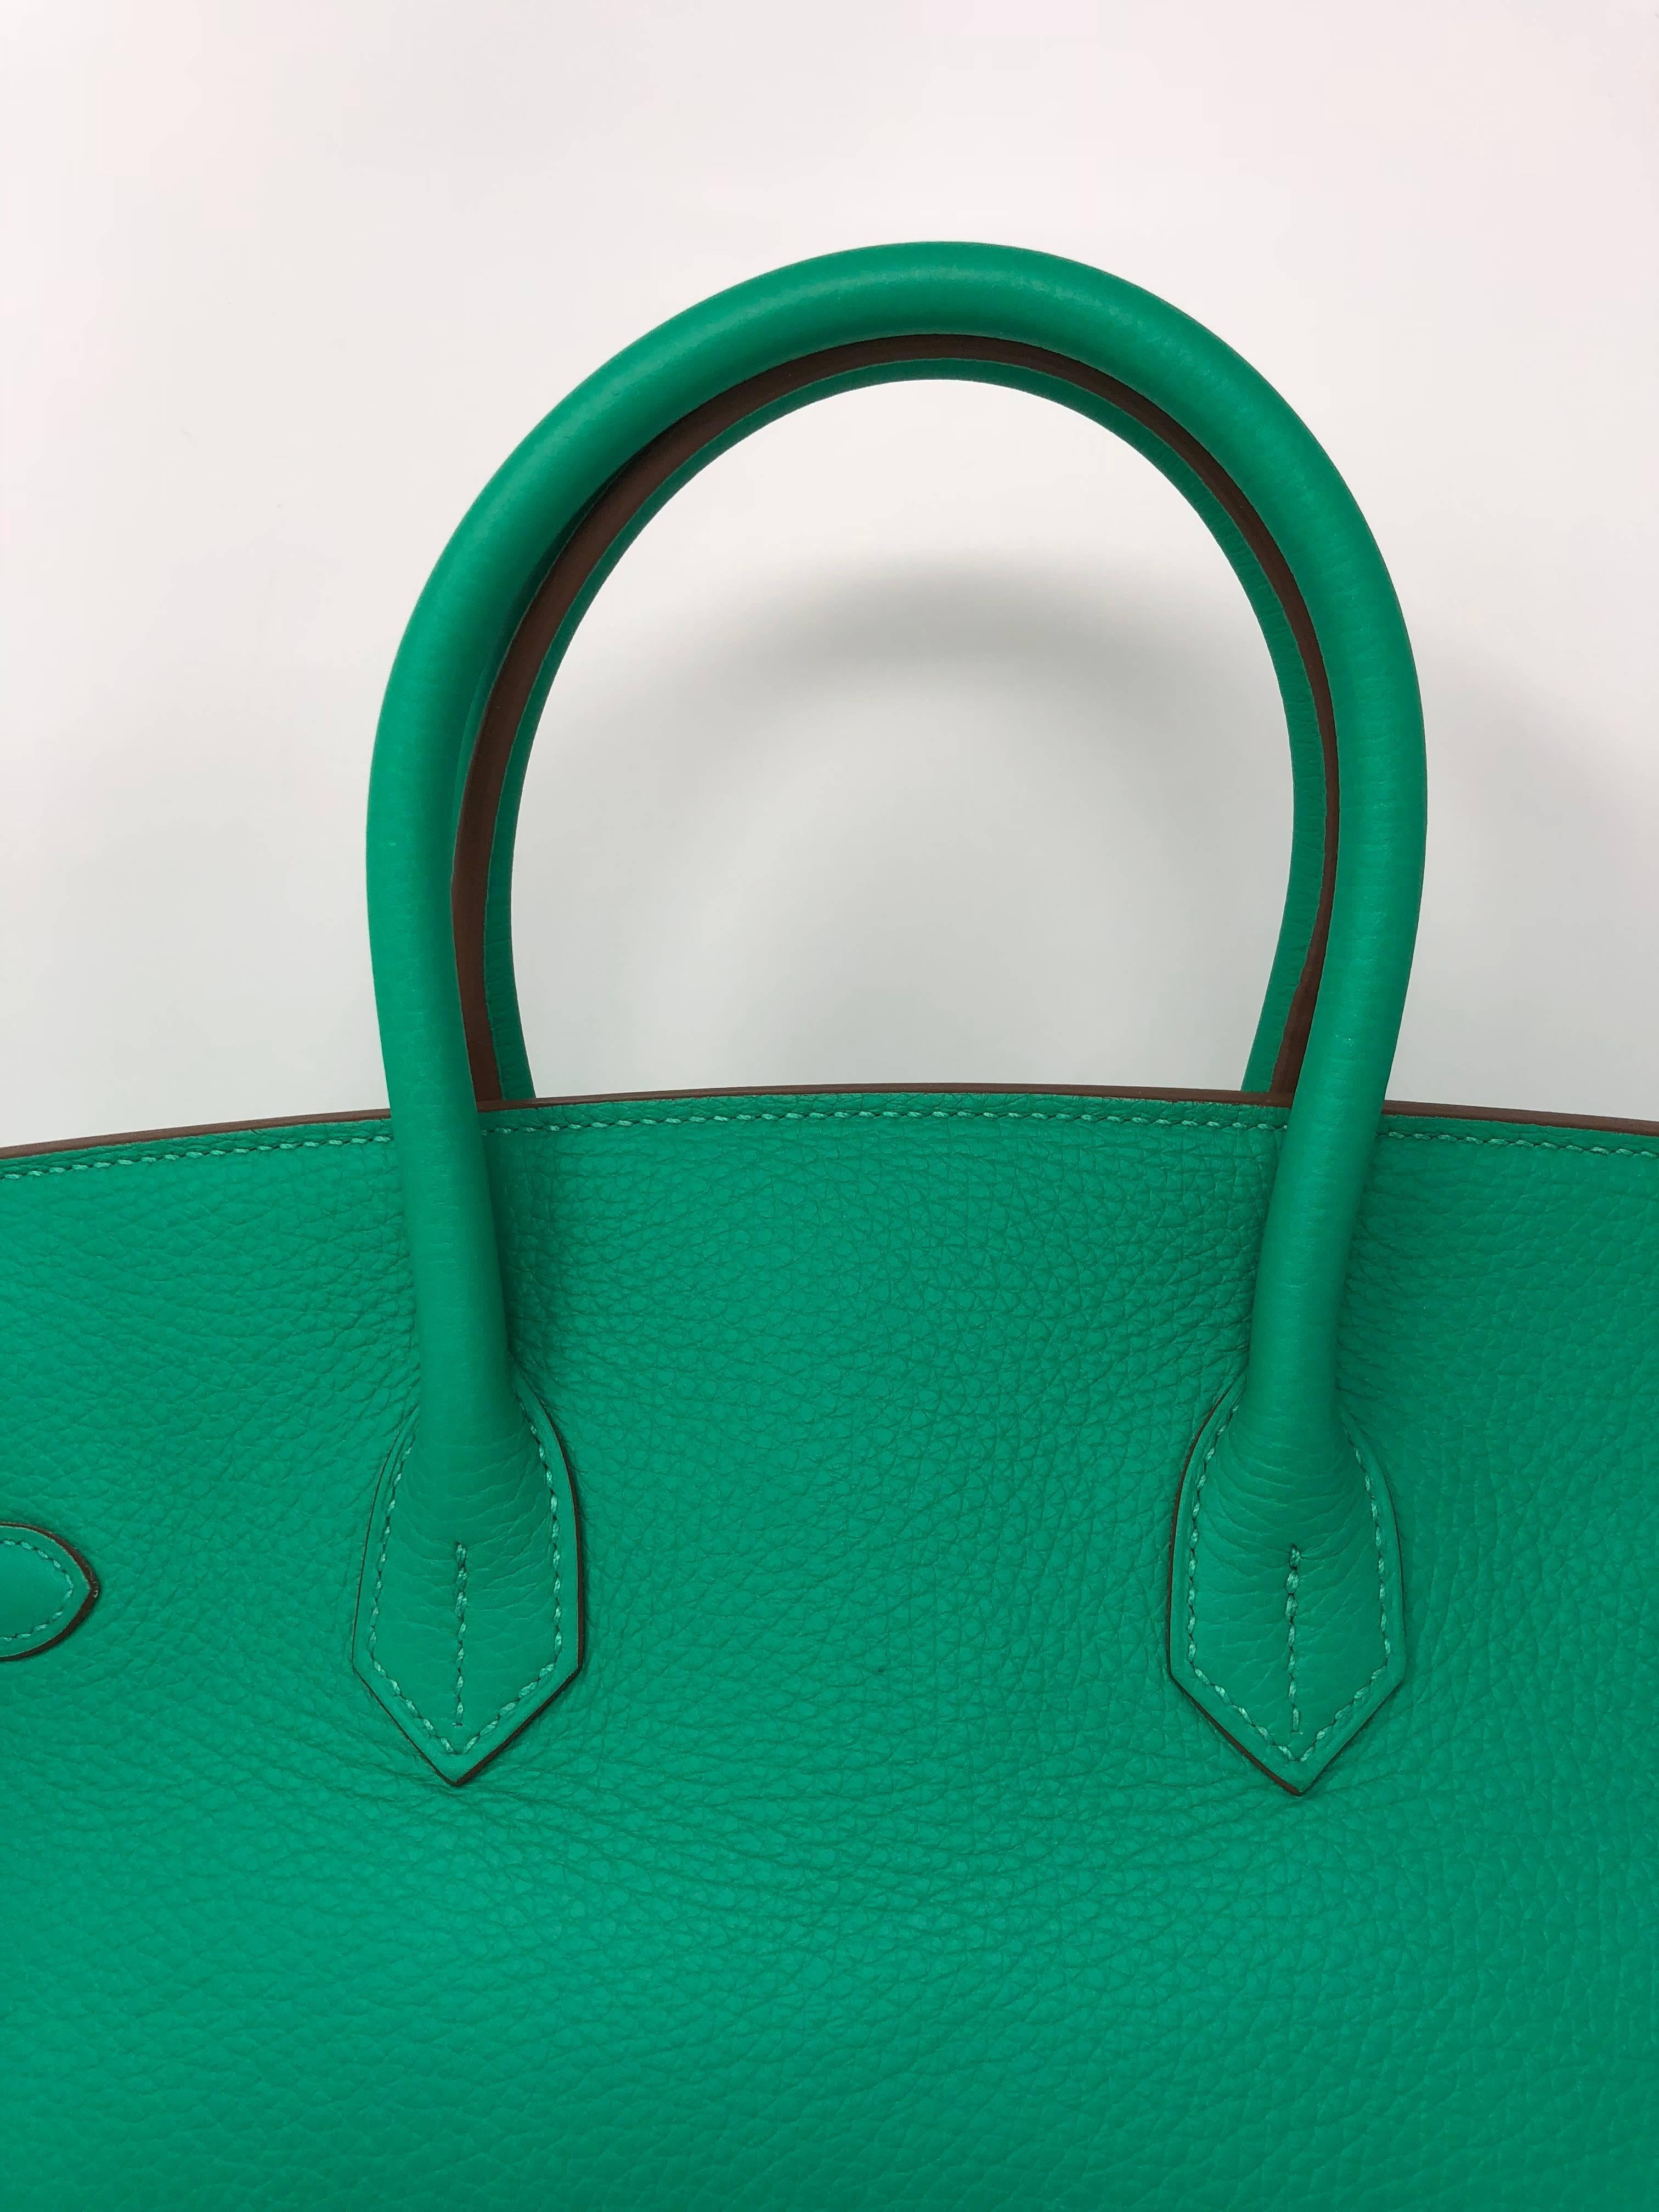 Hermes Menthe Clemence Leather Birkin 35 Bag In Good Condition In Athens, GA